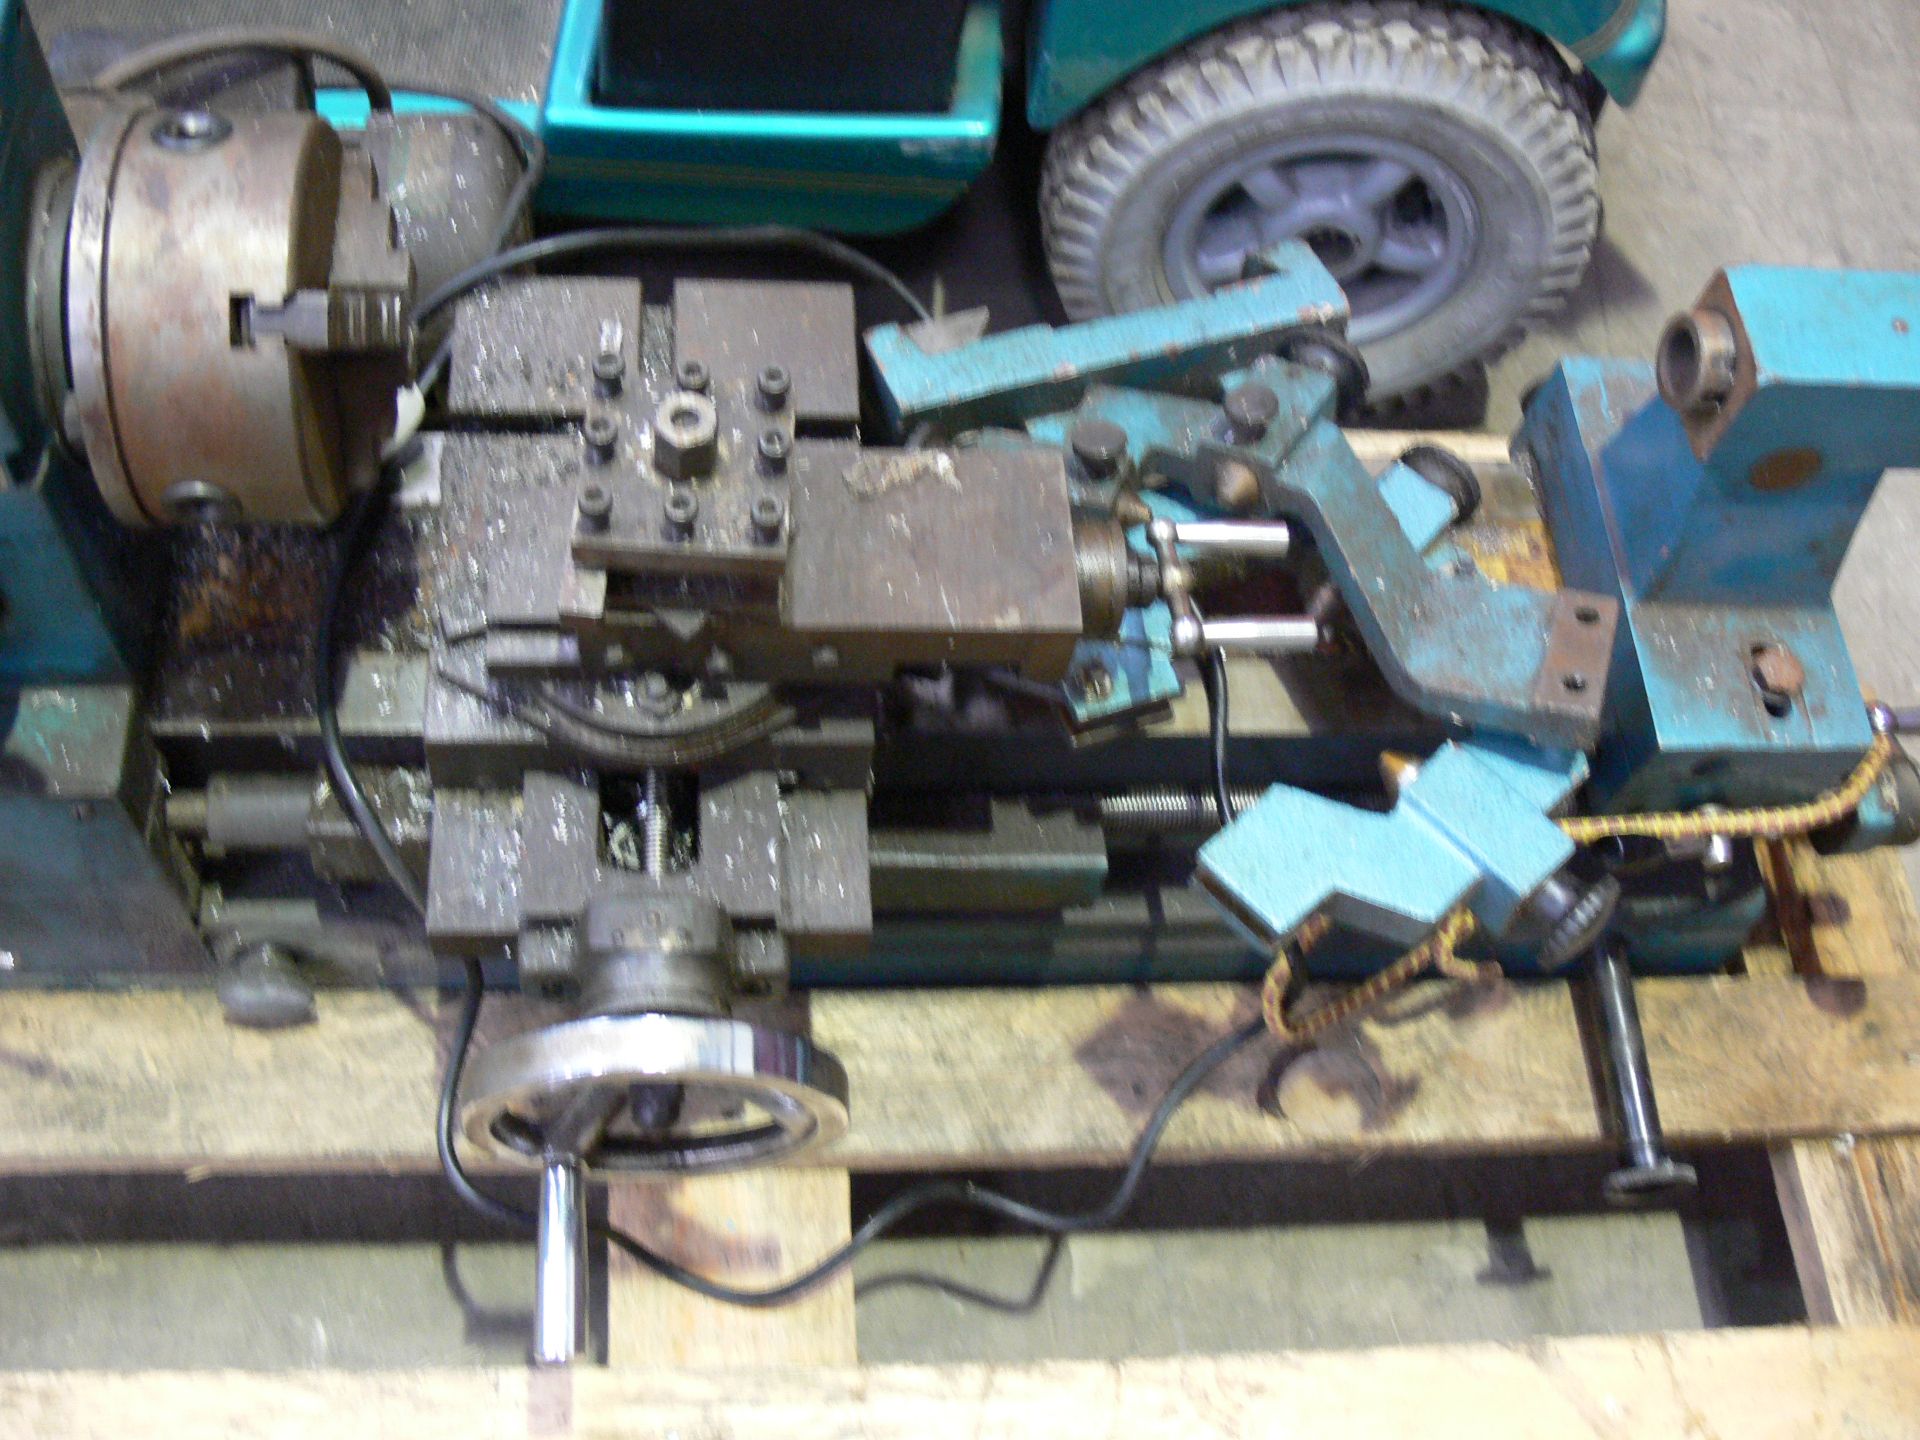 A small Clarke metal worker 6 x speed lathe - Image 2 of 3